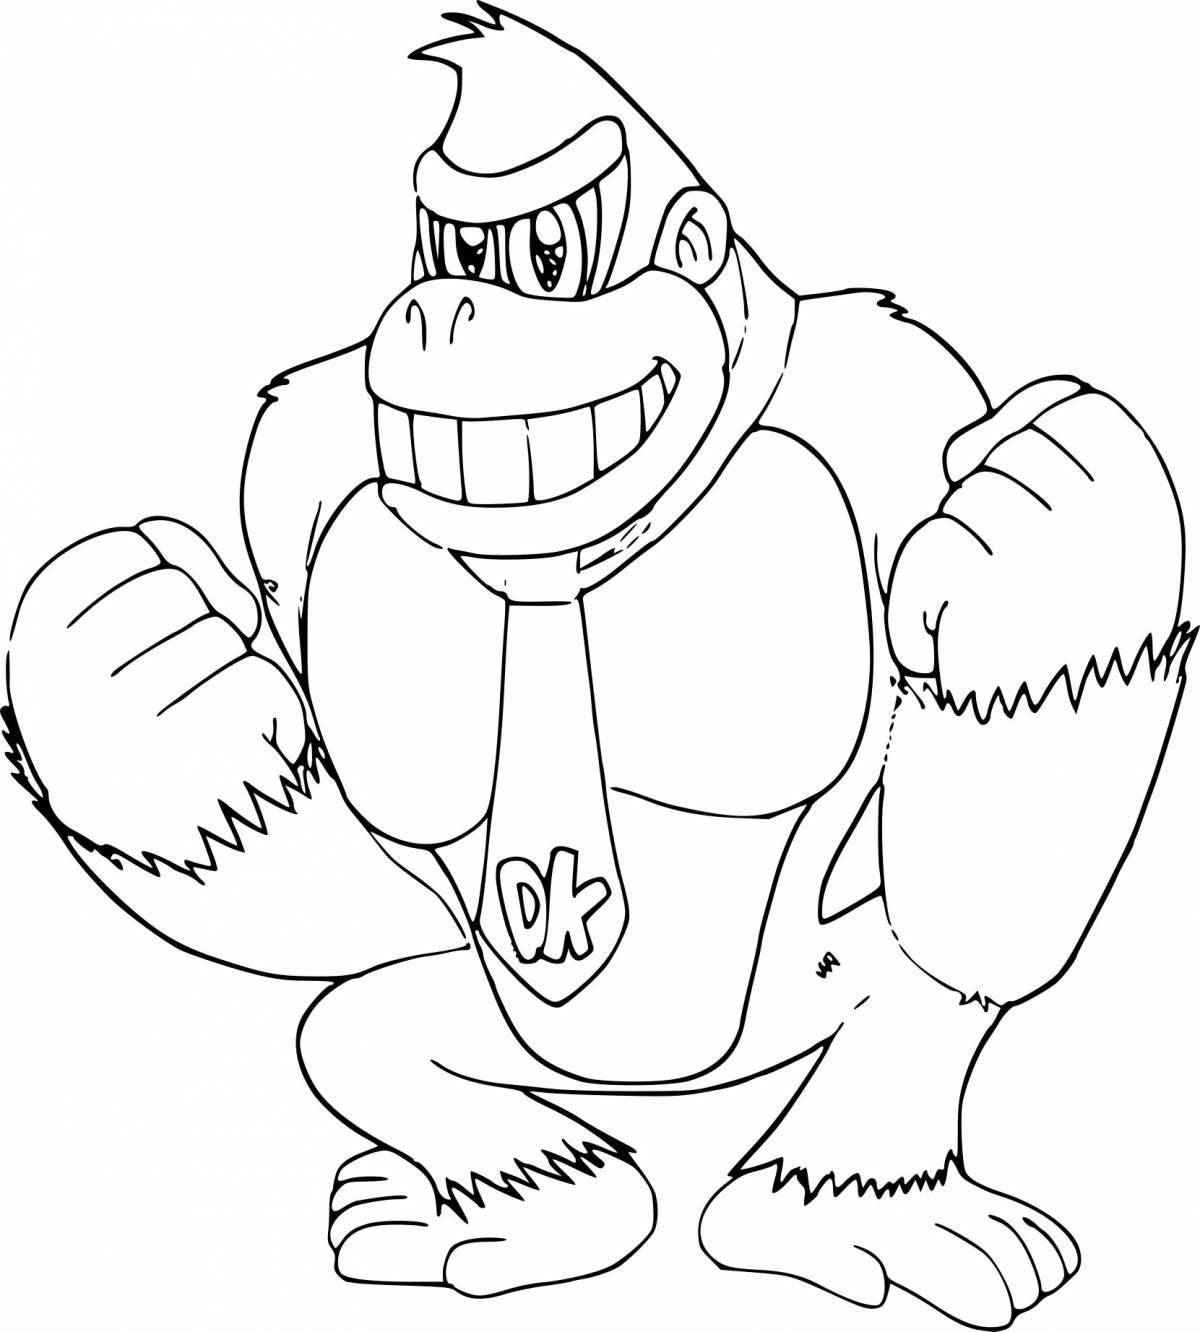 Lovely kong monkey king coloring page